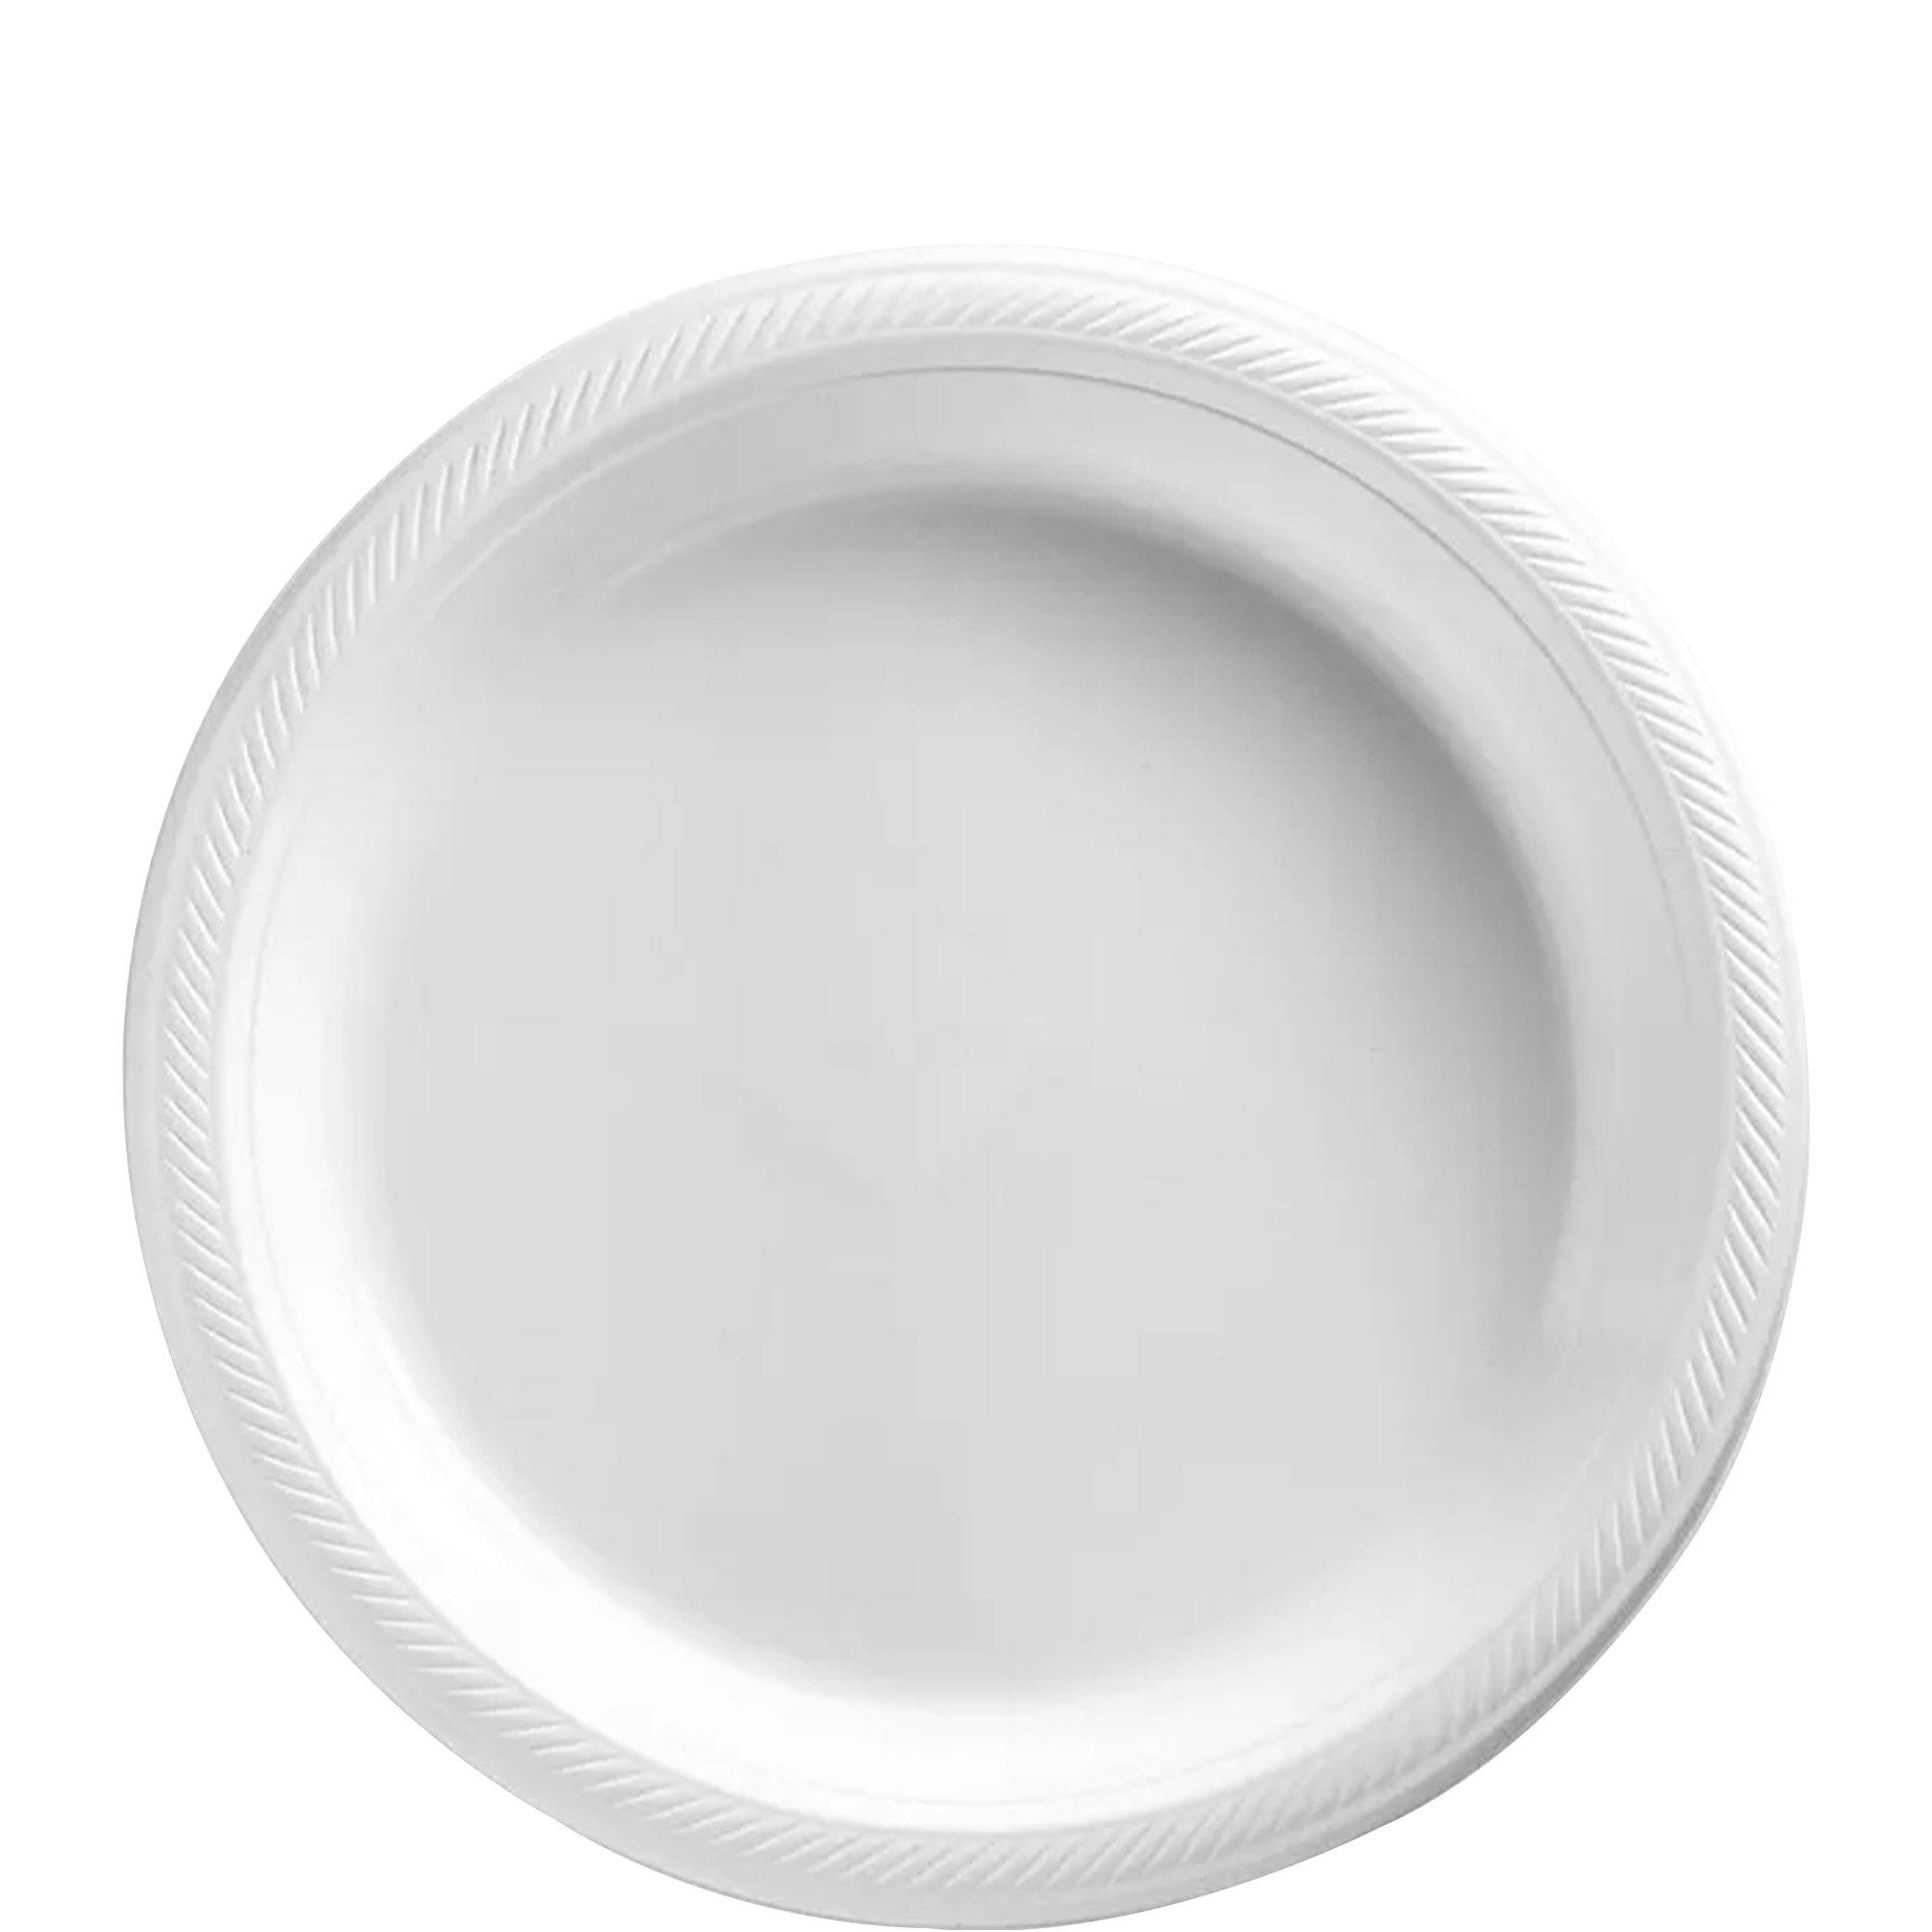 Stock Your Home 400 Count Premium White Plastic Plates, 6 inch White Disposable Wedding Cake Plates, Heavy Duty Plastic Dessert Plates, Cocktail